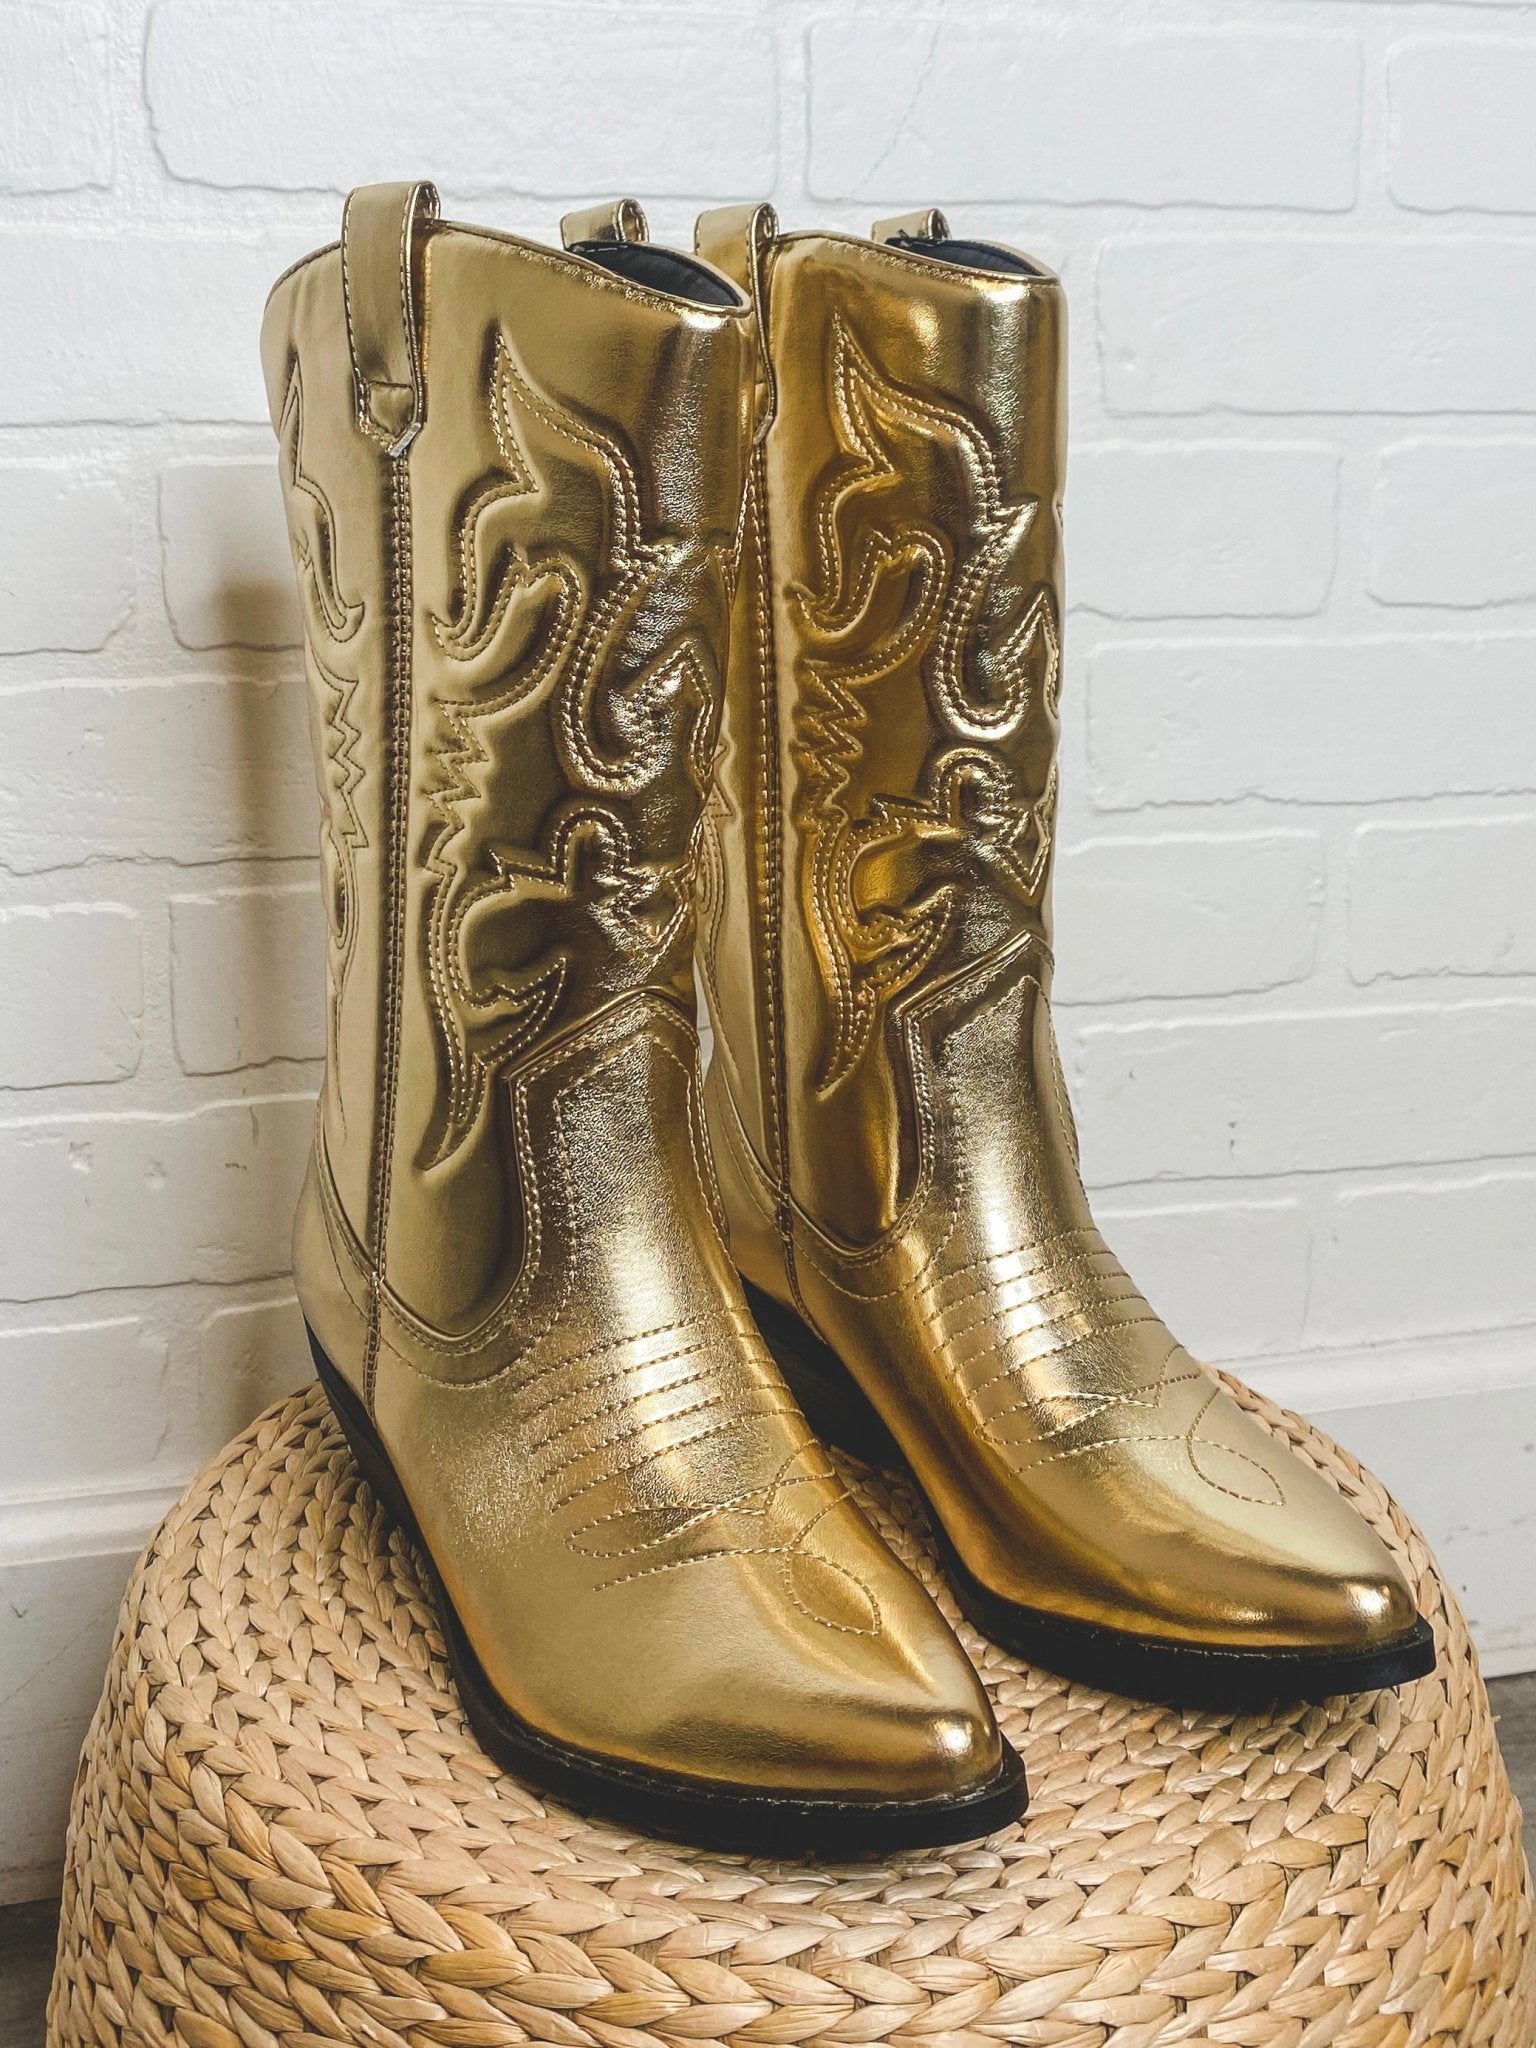 Reno cowboy boots gold - Trendy Shoes - Fashion Shoes at Lush Fashion Lounge Boutique in Oklahoma City